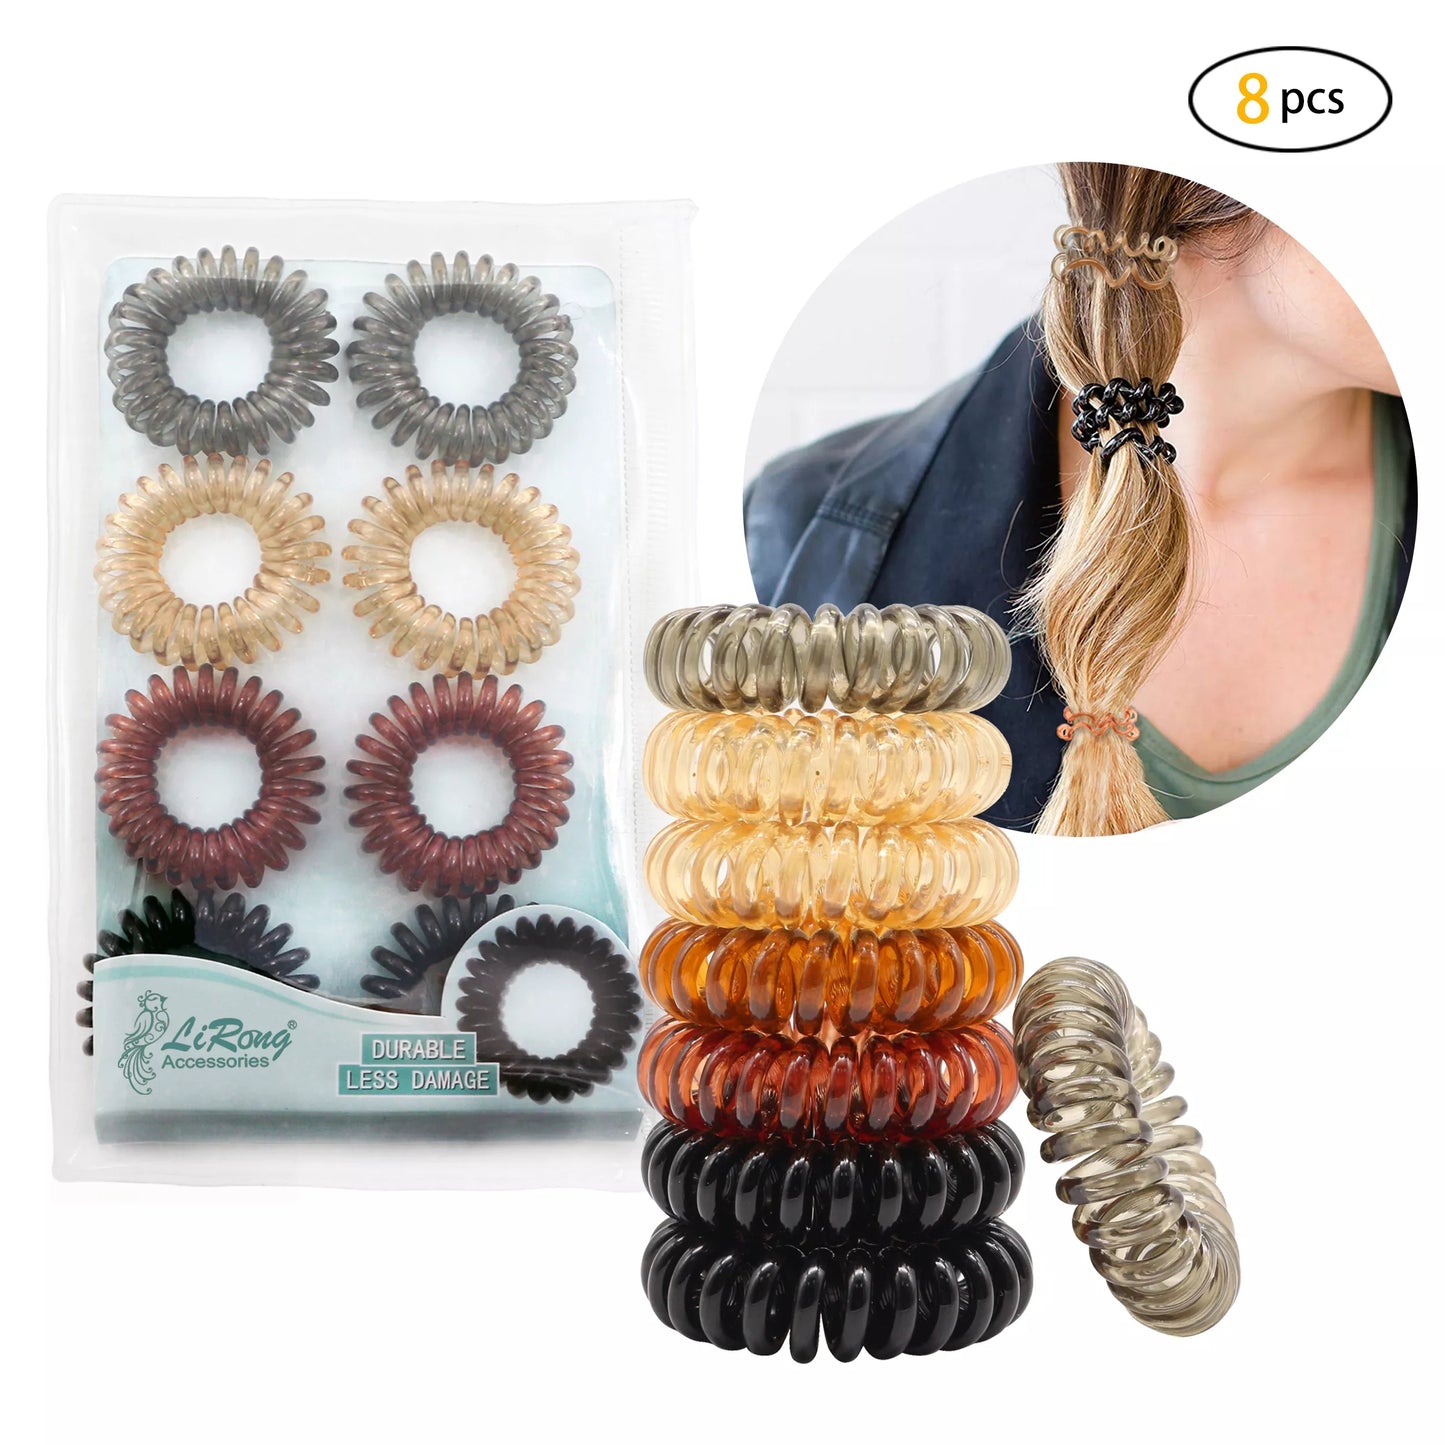 BSCI Audited Factory 3.5cm Mixed Colour 6pcs Plastic Telephone Cord Hair Tie coil tie Holder no damage for hair